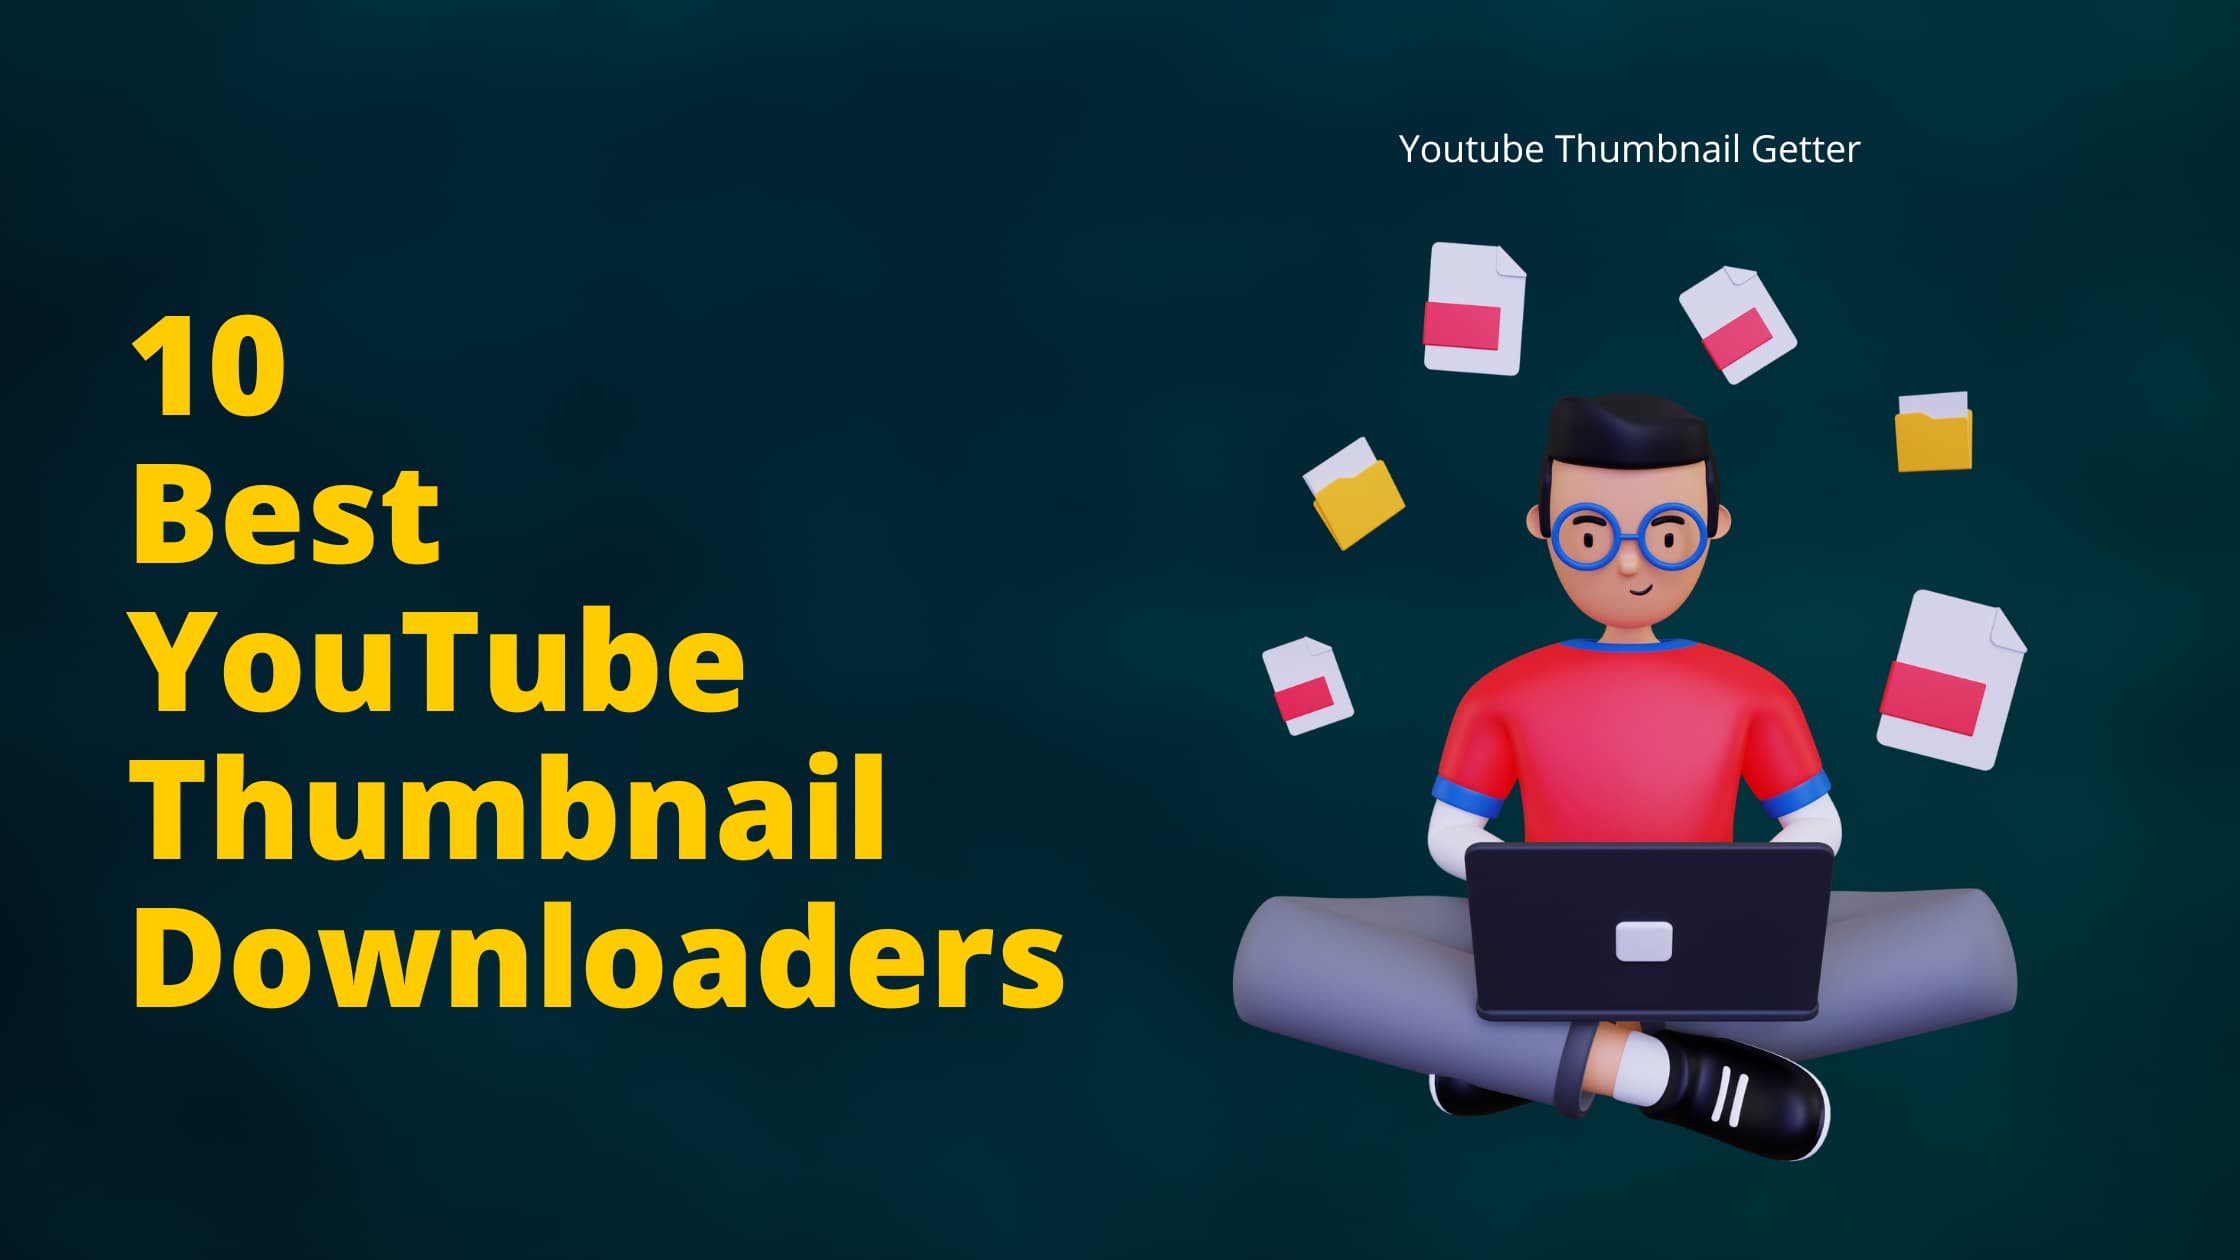 10 Best YouTube Thumbnail Downloaders